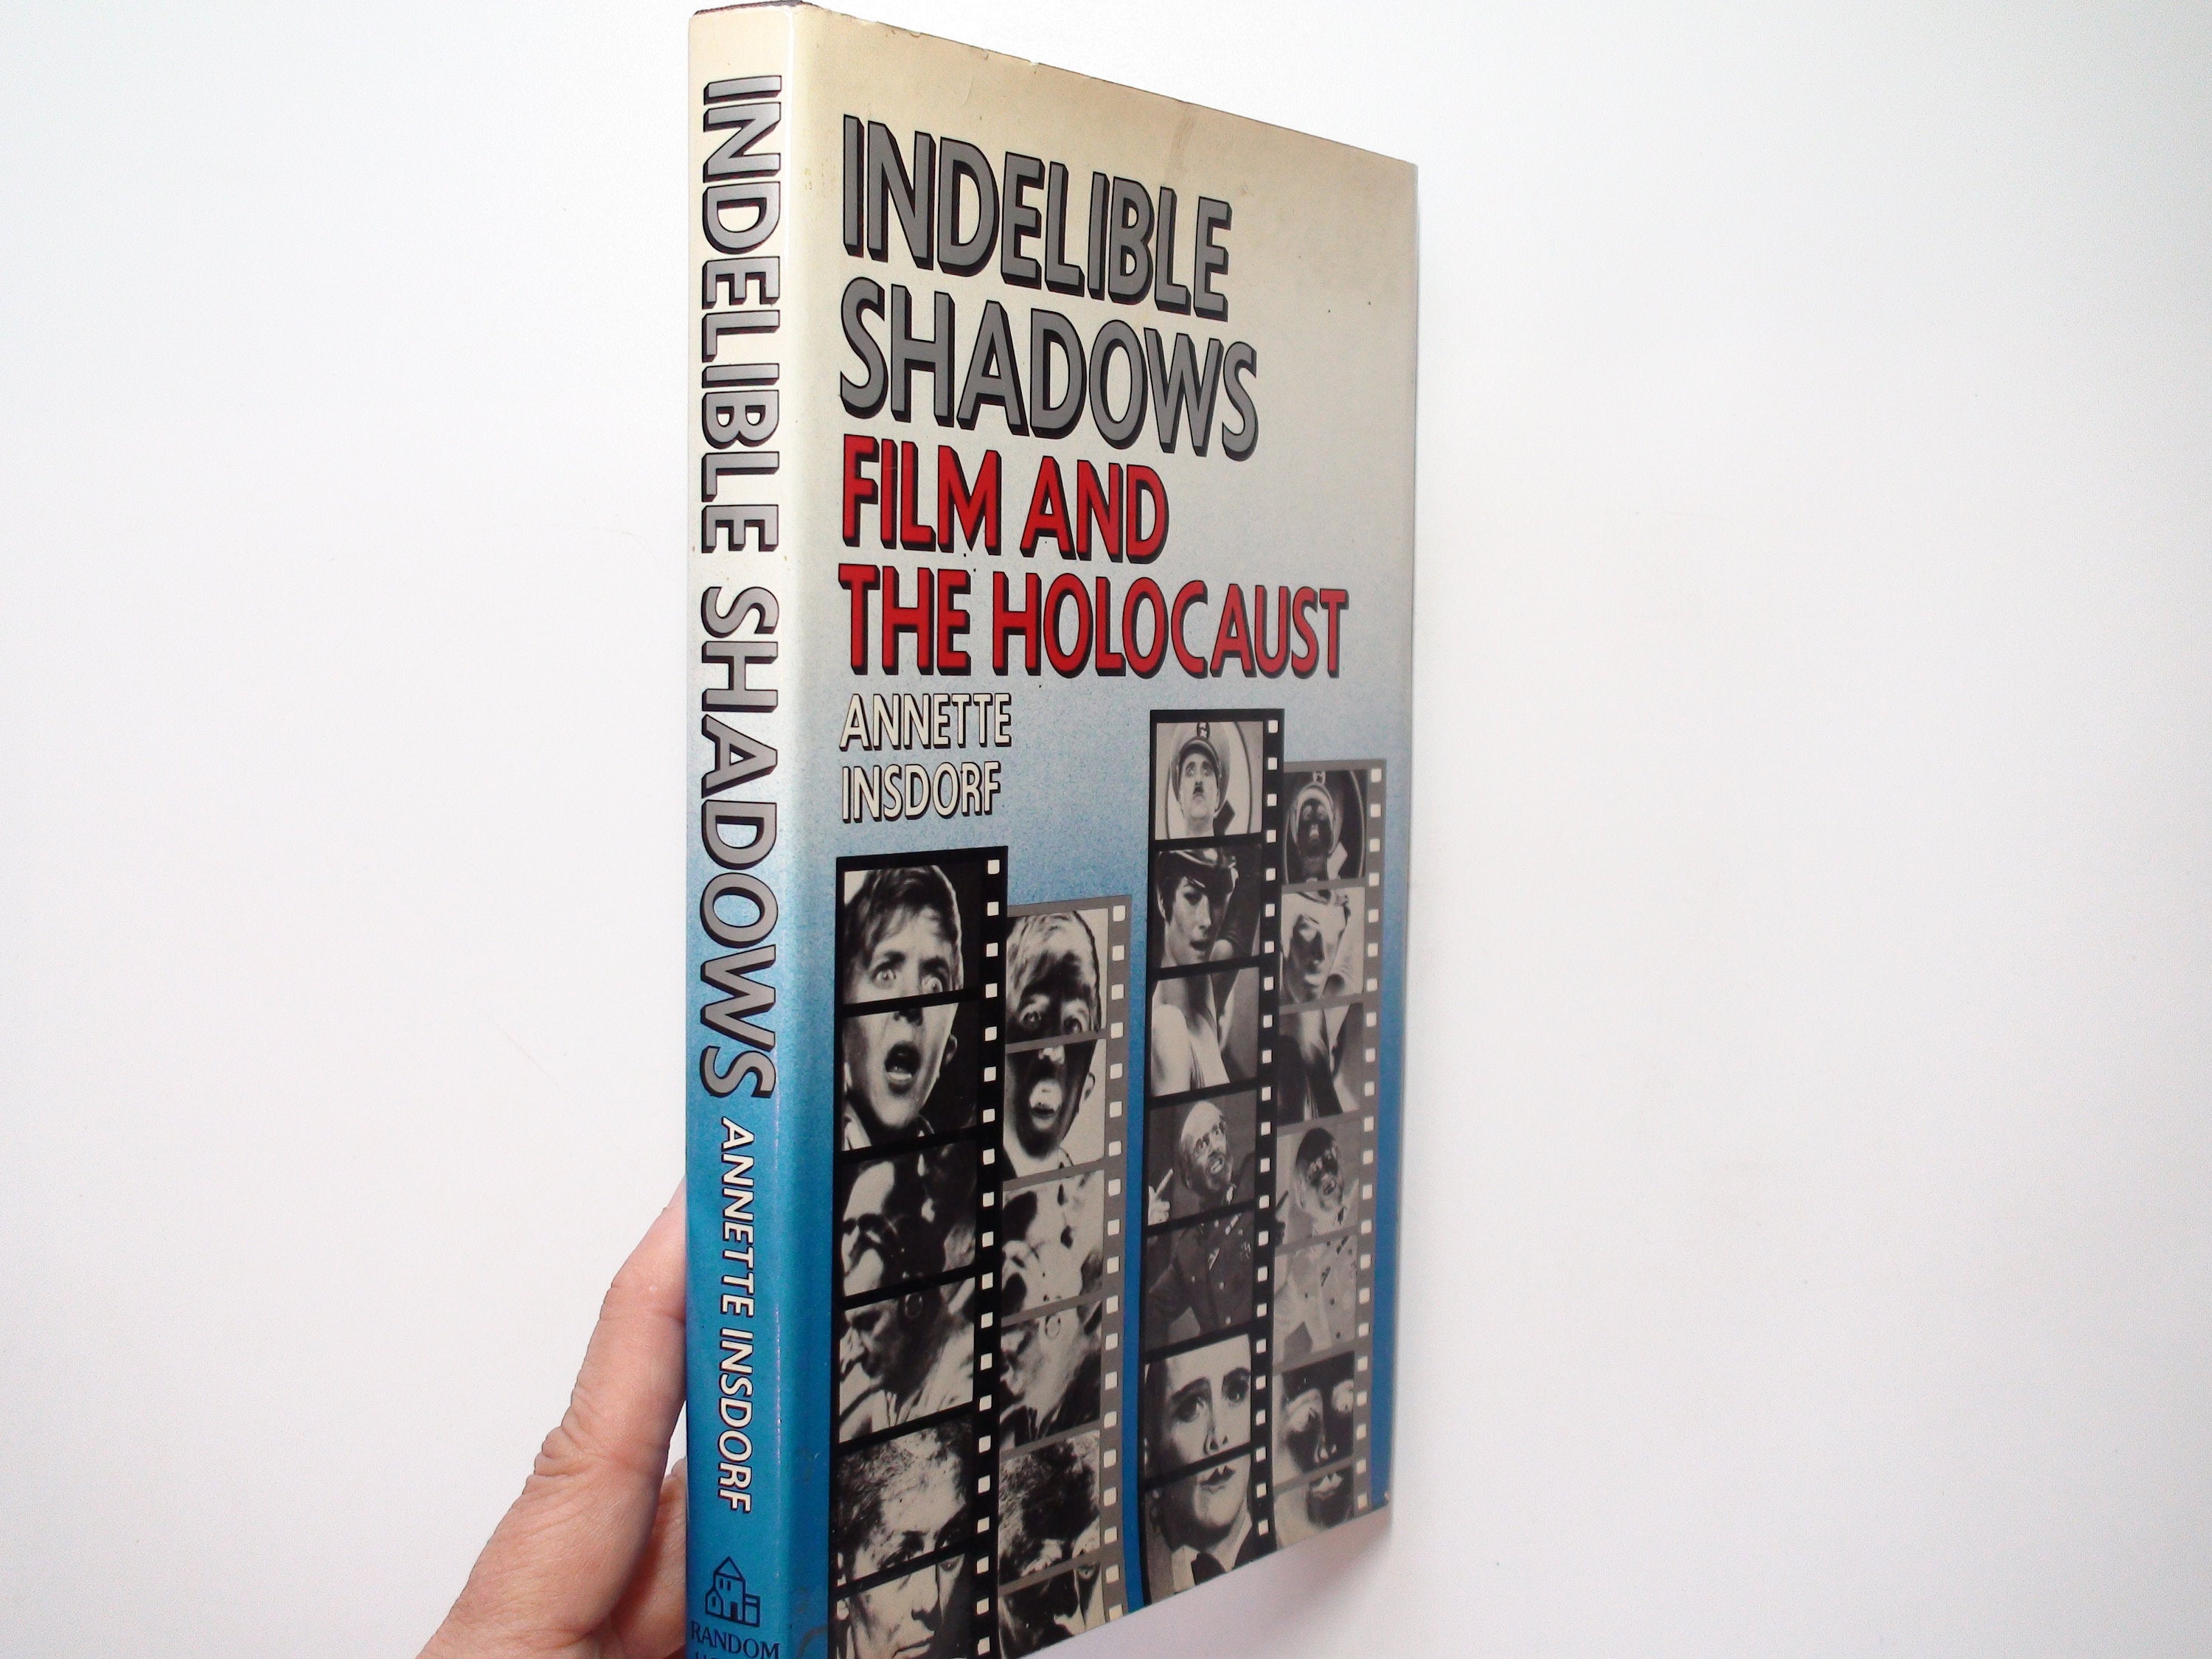 Indelible Shadows, Film and the Holocaust, Annette Insdorf, 1st Ed, 1983